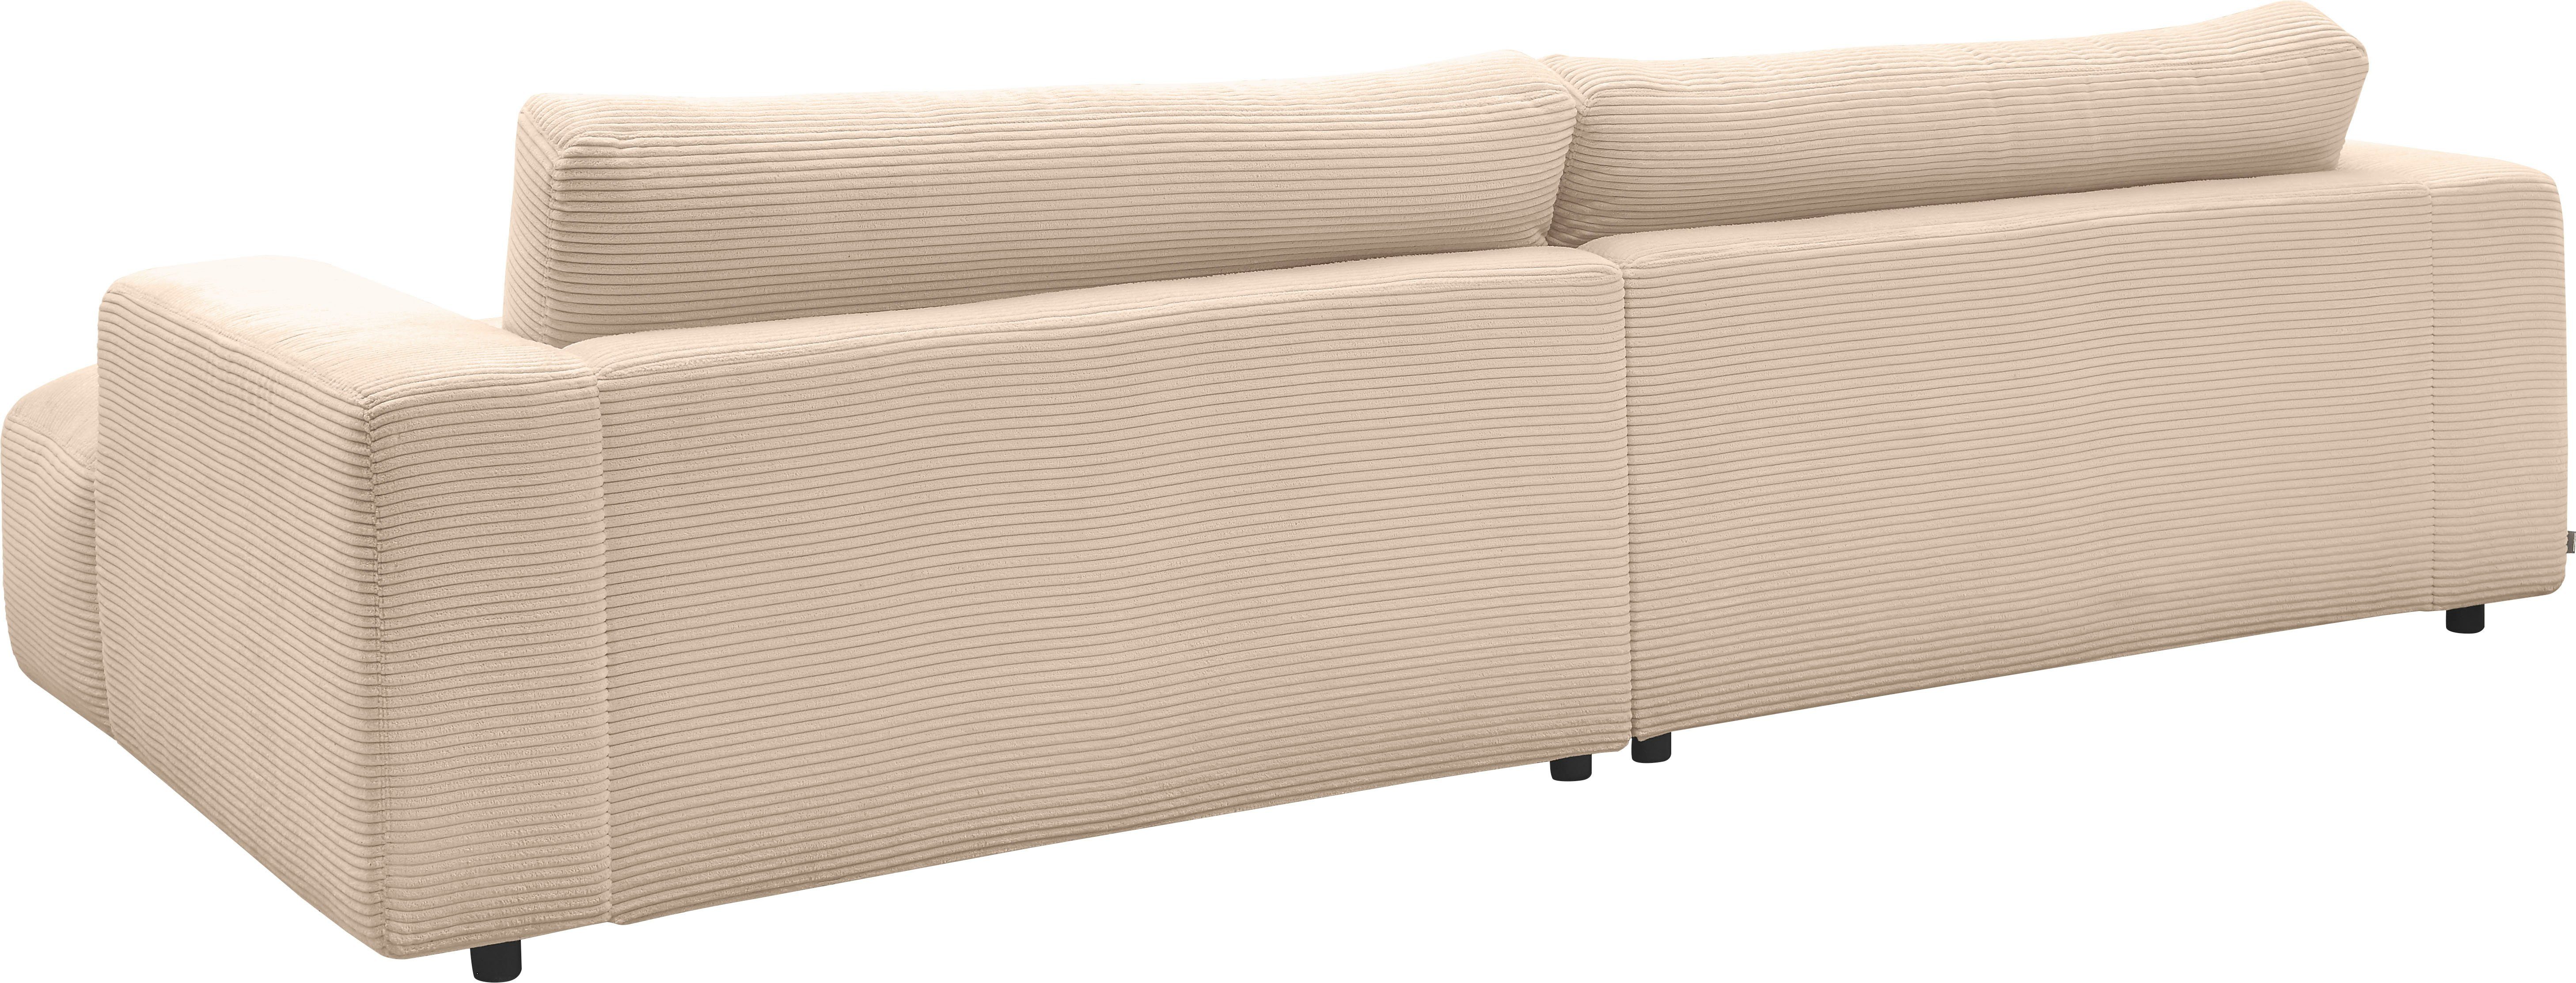 cm Lucia, Musterring 292 Loungesofa GALLERY by Breite nature branded Cord-Bezug, M